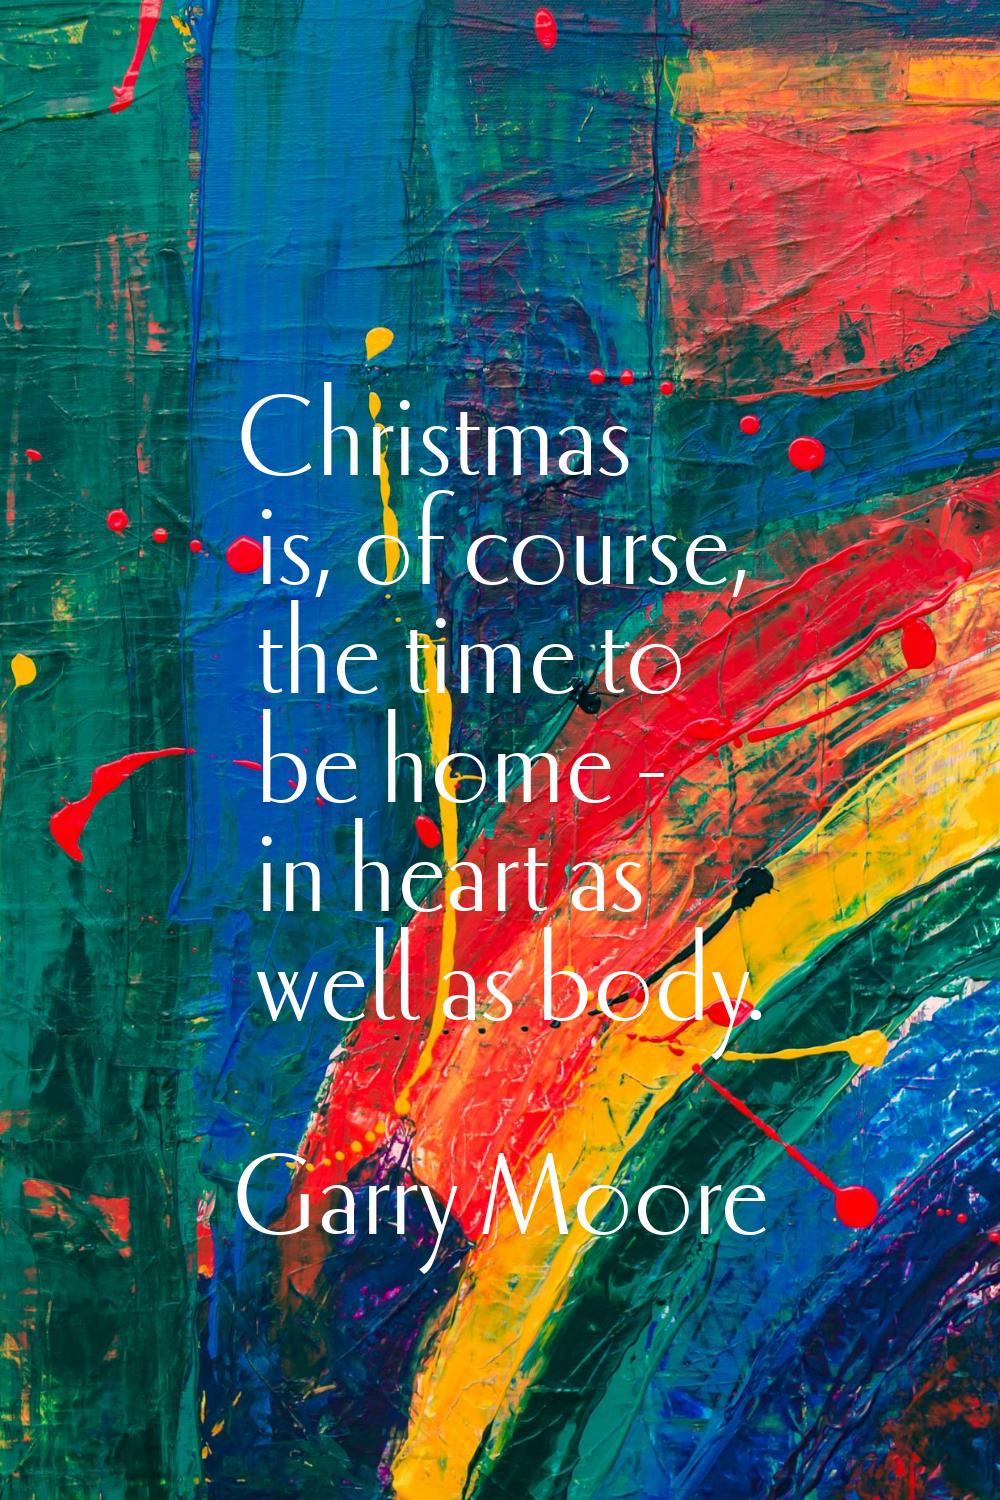 Christmas is, of course, the time to be home - in heart as well as body.